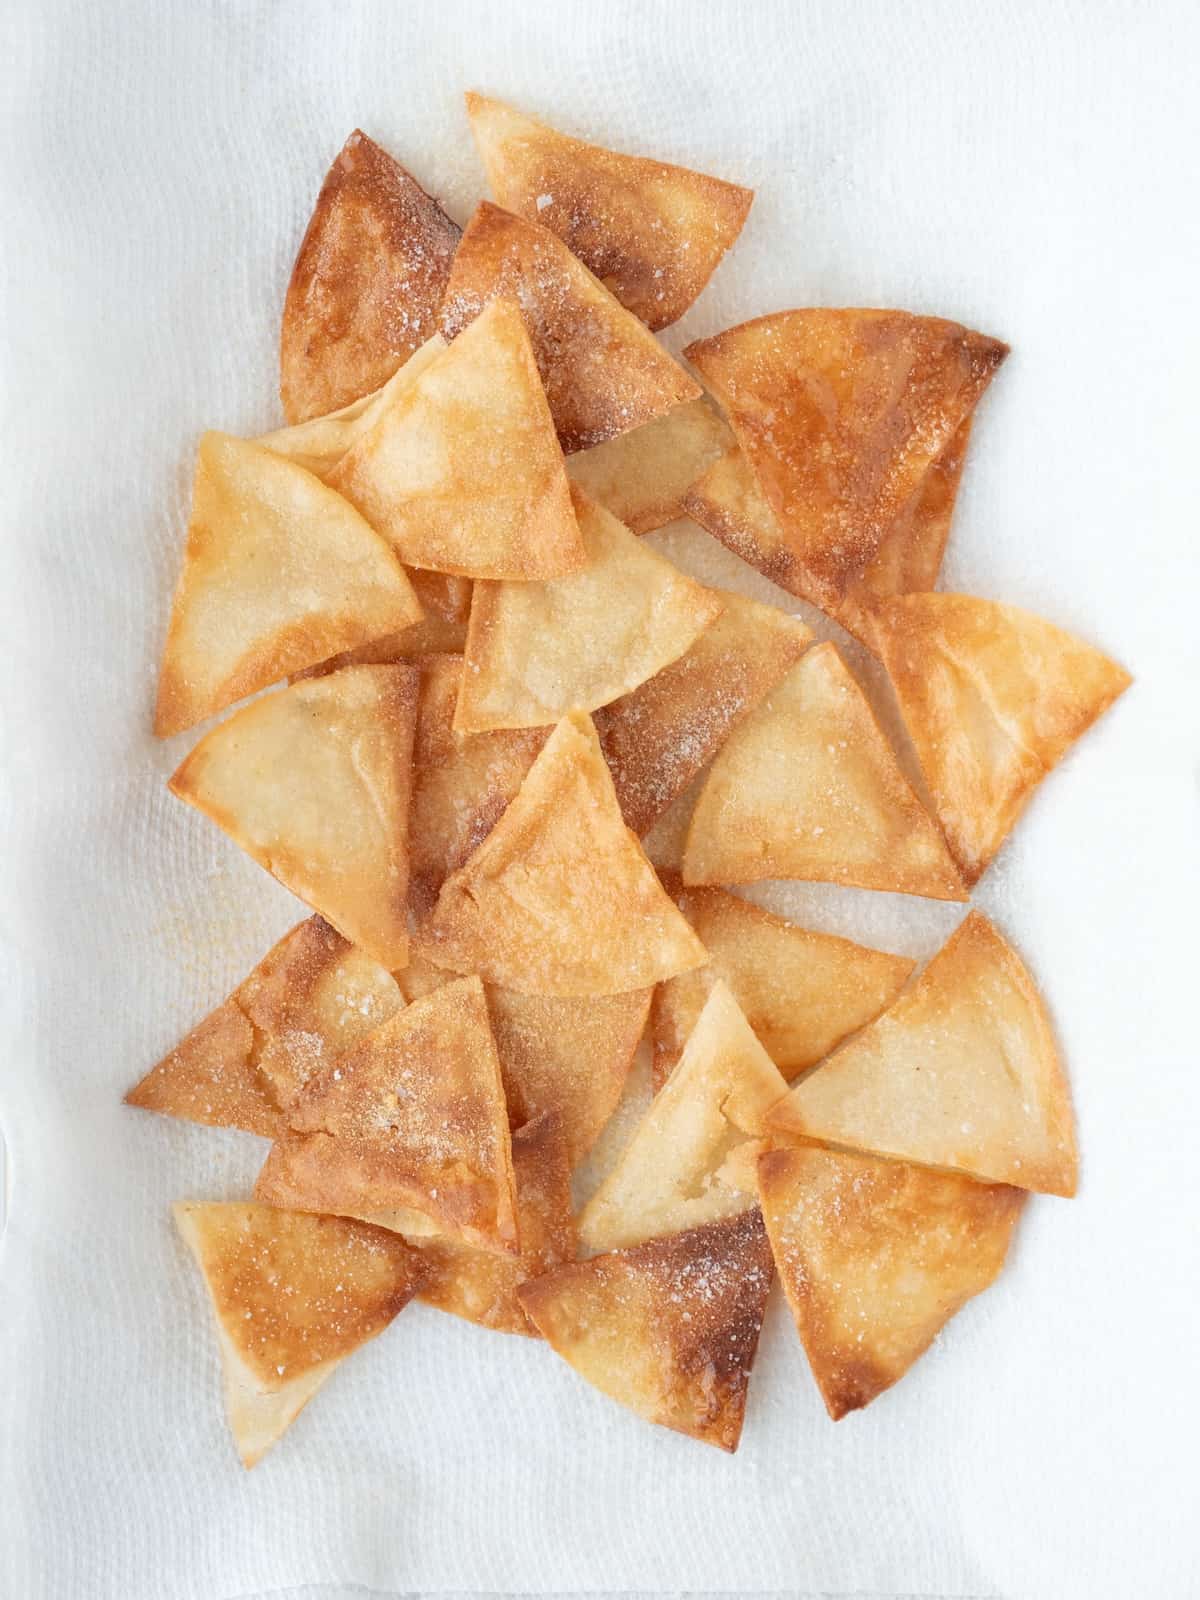 A close up shot of fried tortilla chips on white tissues to soak the excess oil, the chips are sprinkled with salt and garlic powder.